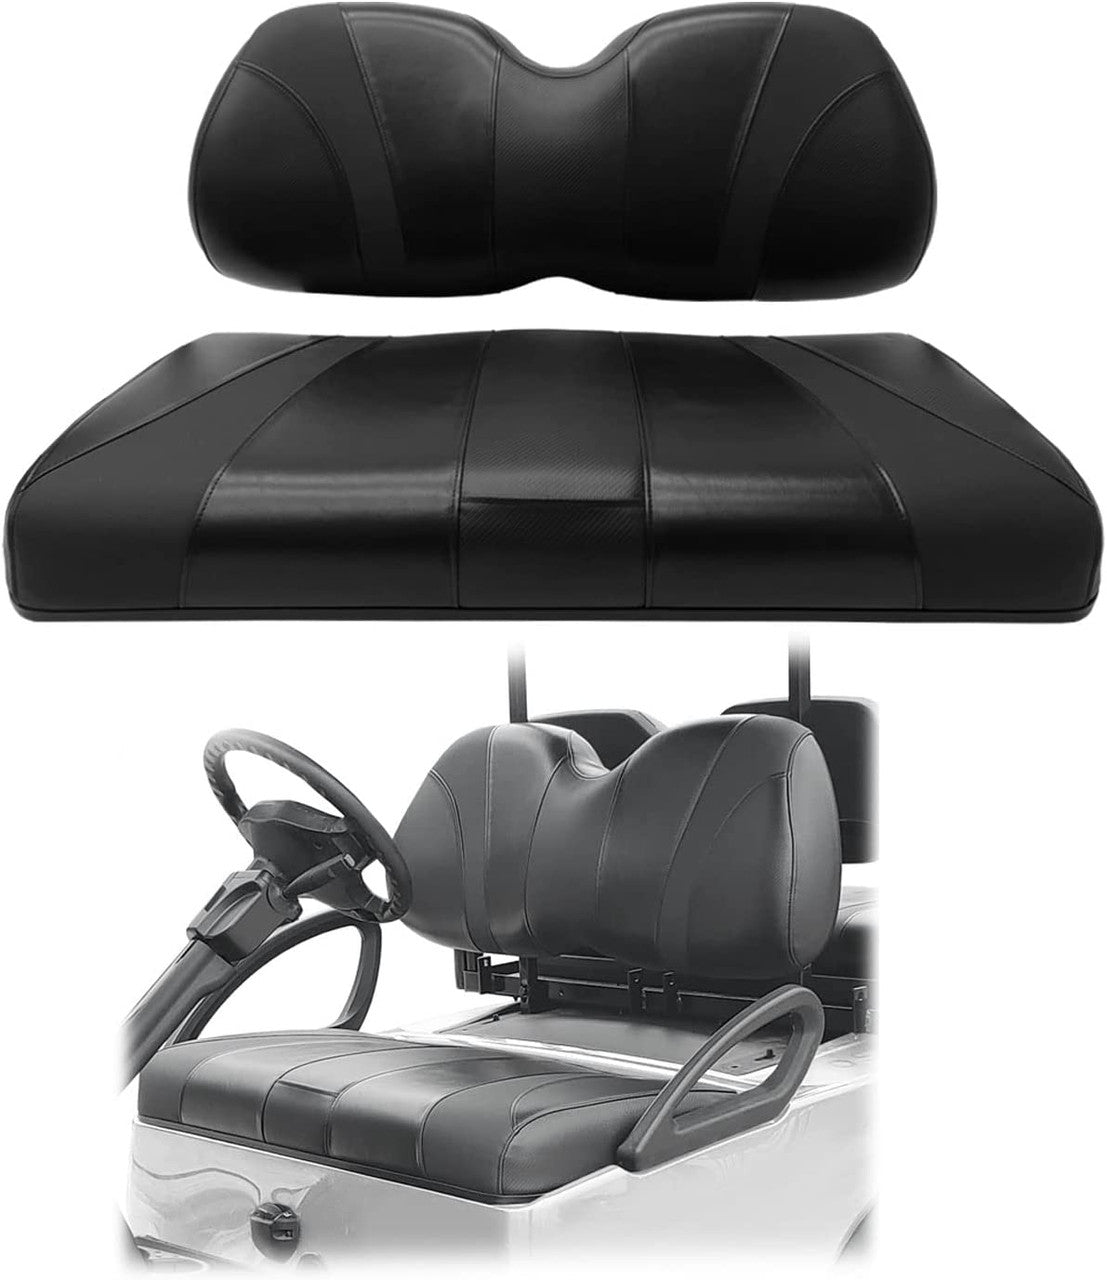 SlipStream Front Seat Cover Set Triple Black - Fits Yamaha G29/Drive & Drive2